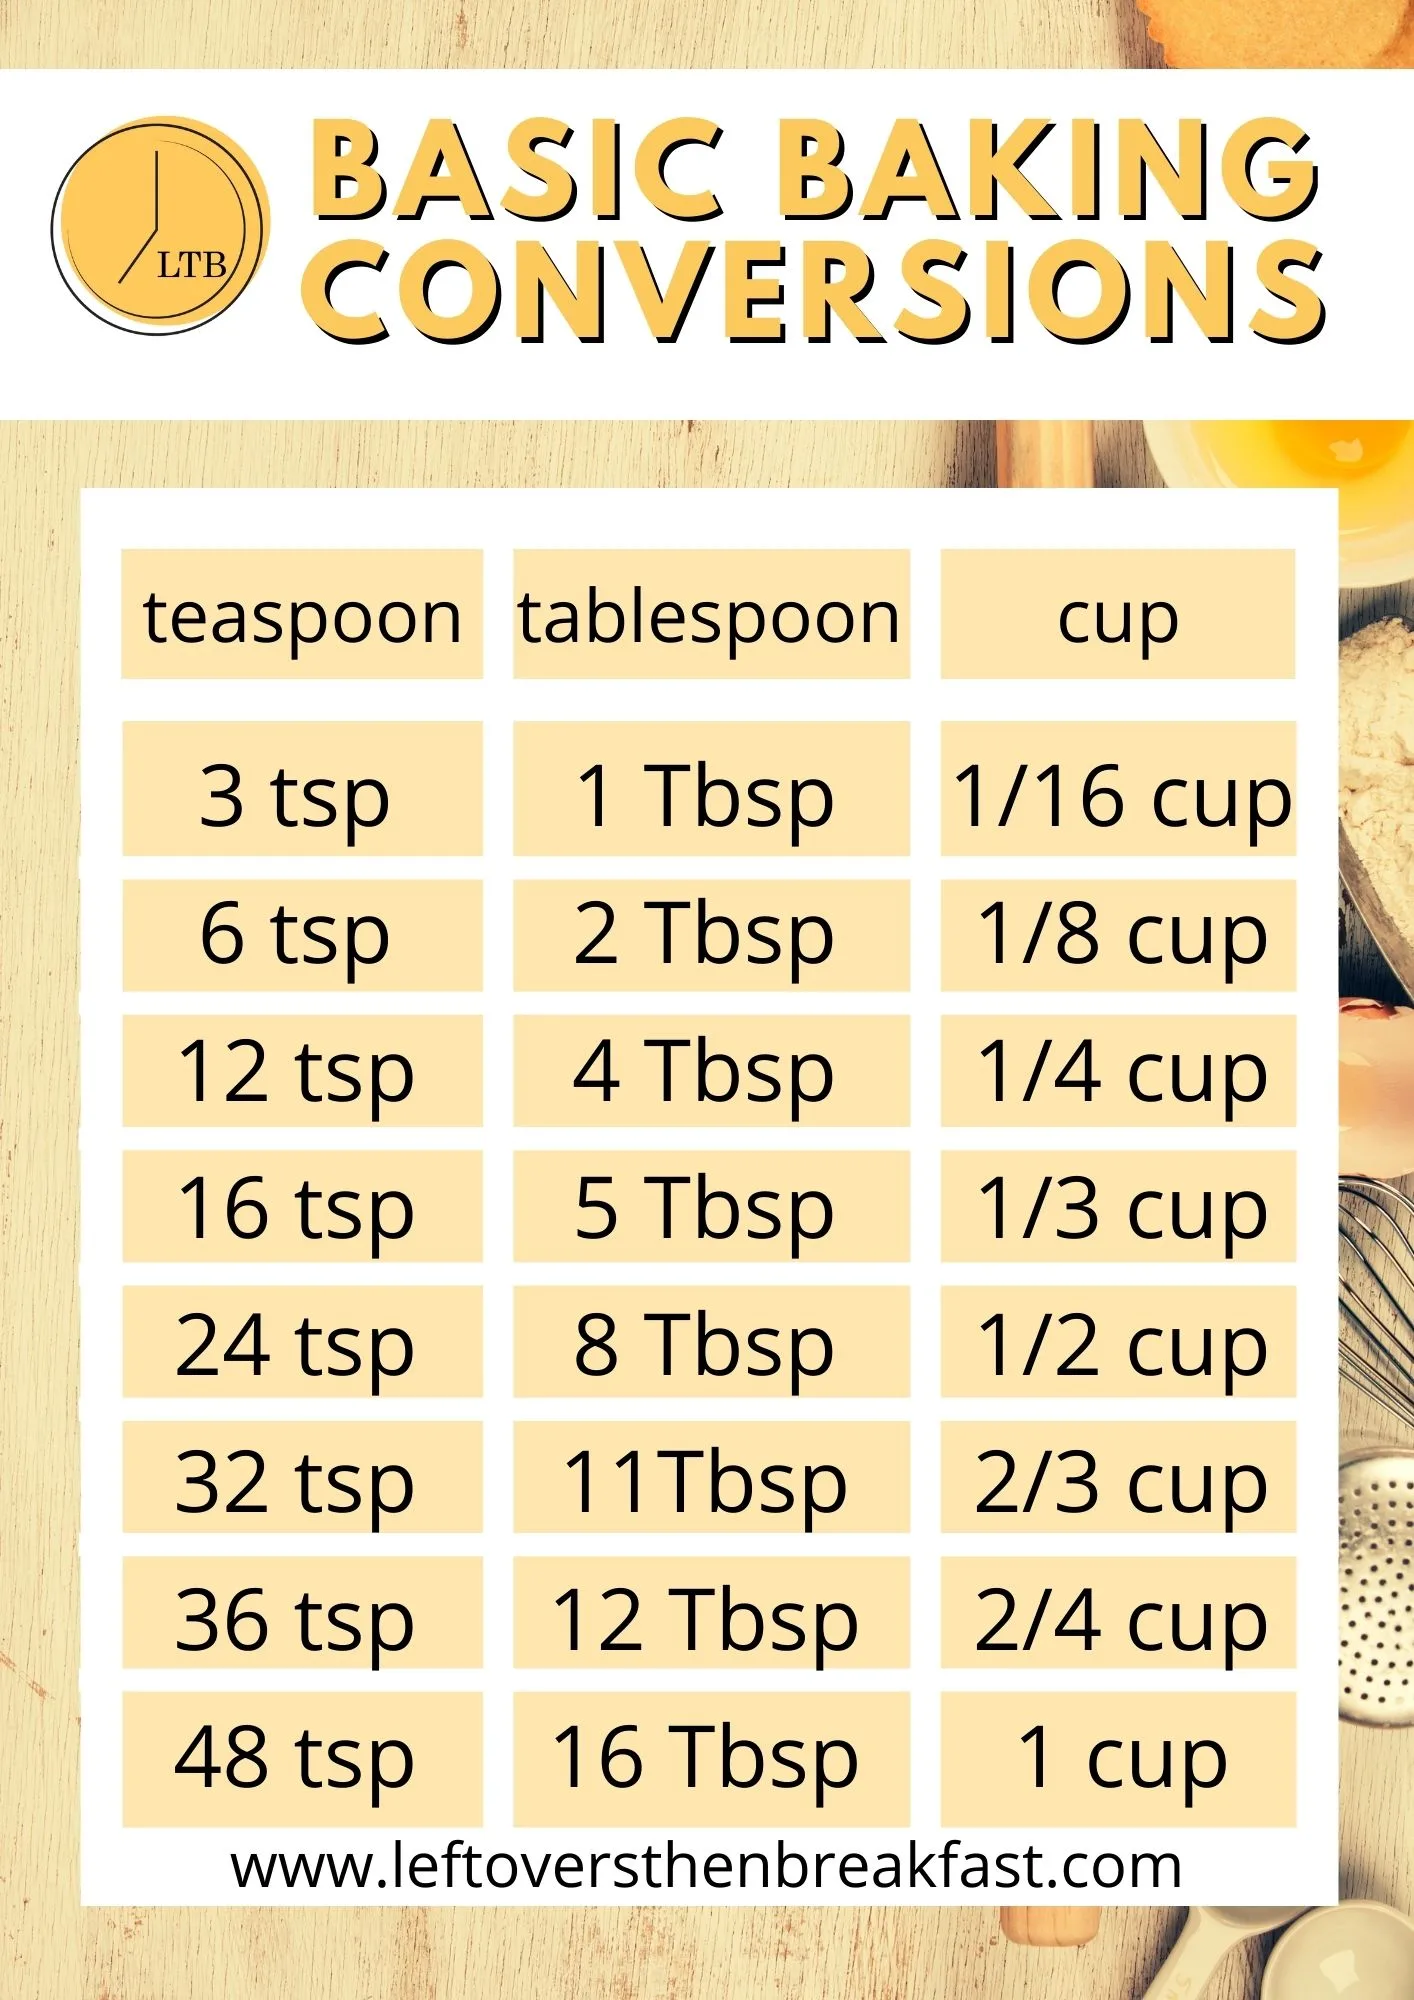 Conversion: Teaspoons to Tablespoons